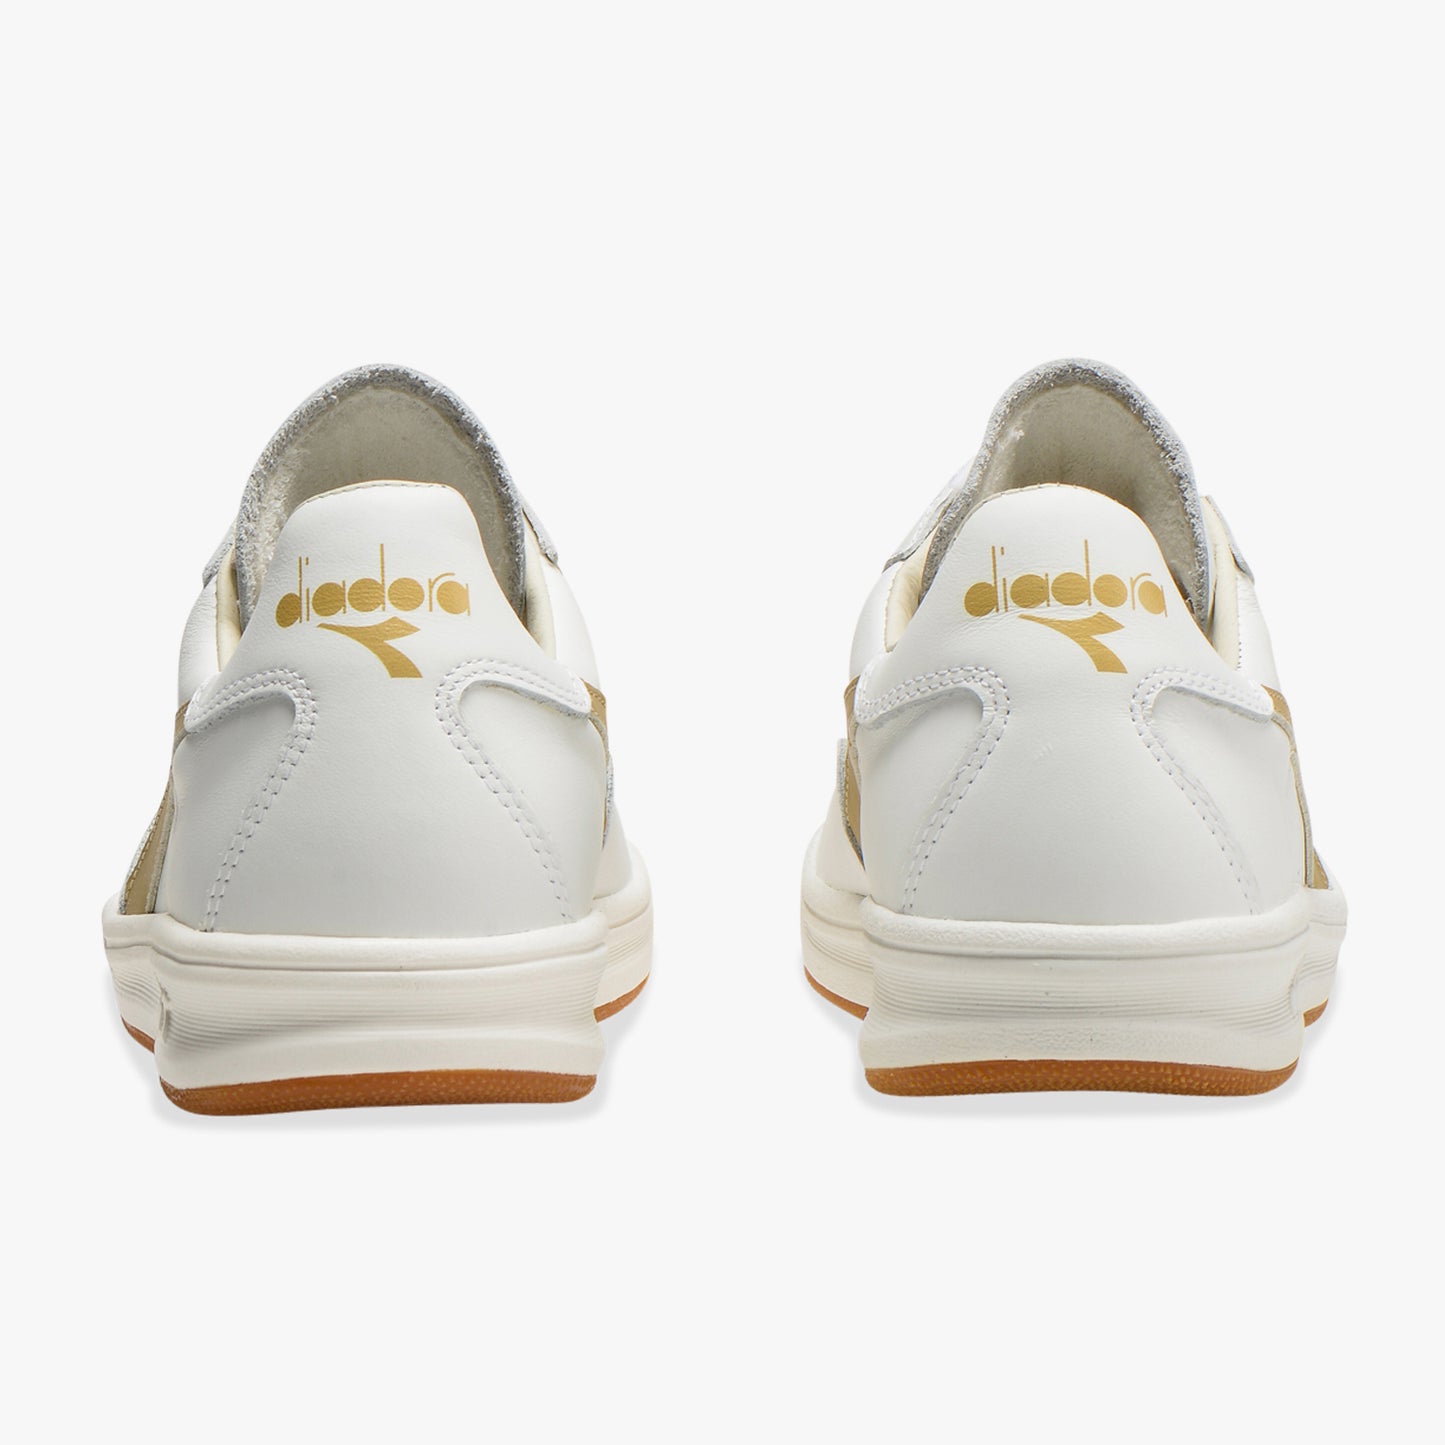 back view of white and gold B. elite h italia sport diadora shoes made in italy